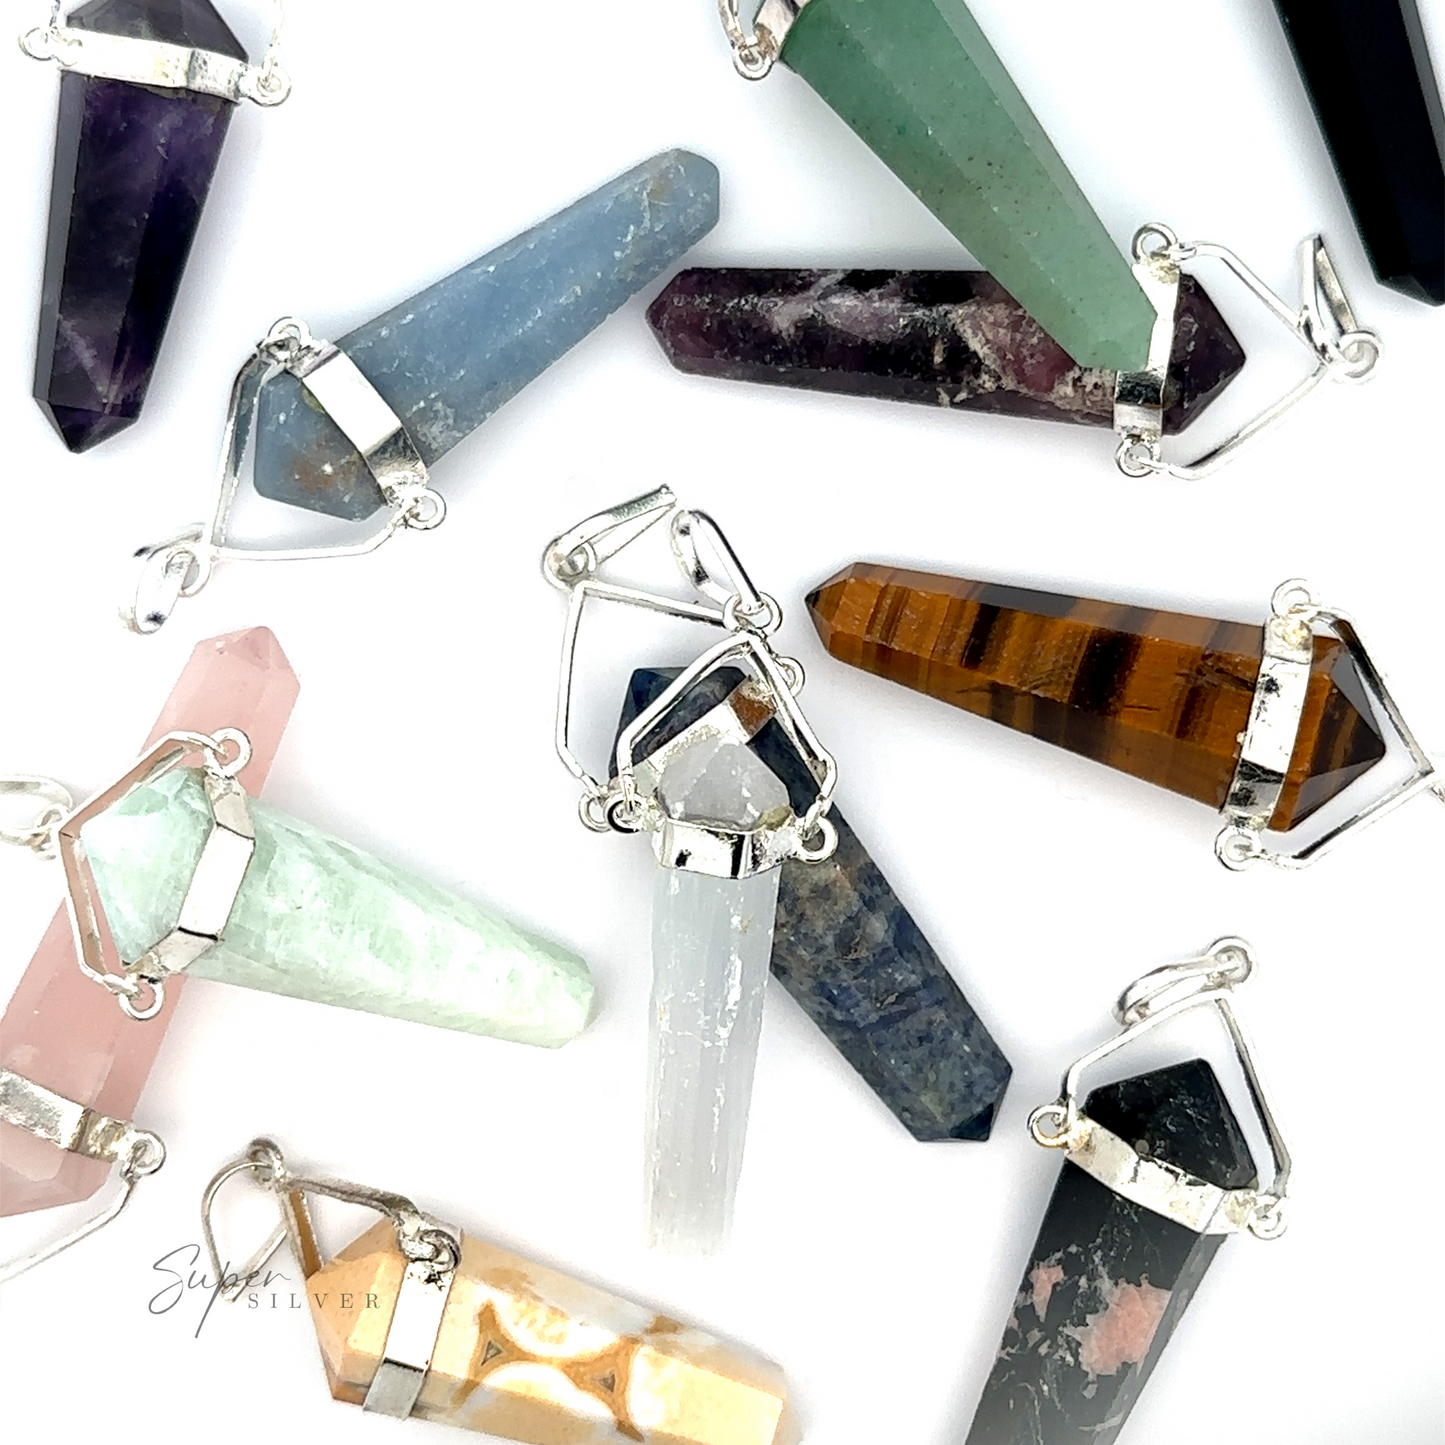 Raw Stone Swivel Pendant with silver-plated settings are displayed on a white surface, featuring various colors and types such as amethyst, tiger's eye, and rose quartz. In the background, a raw stone obelisk adds a touch of natural elegance to the scene.